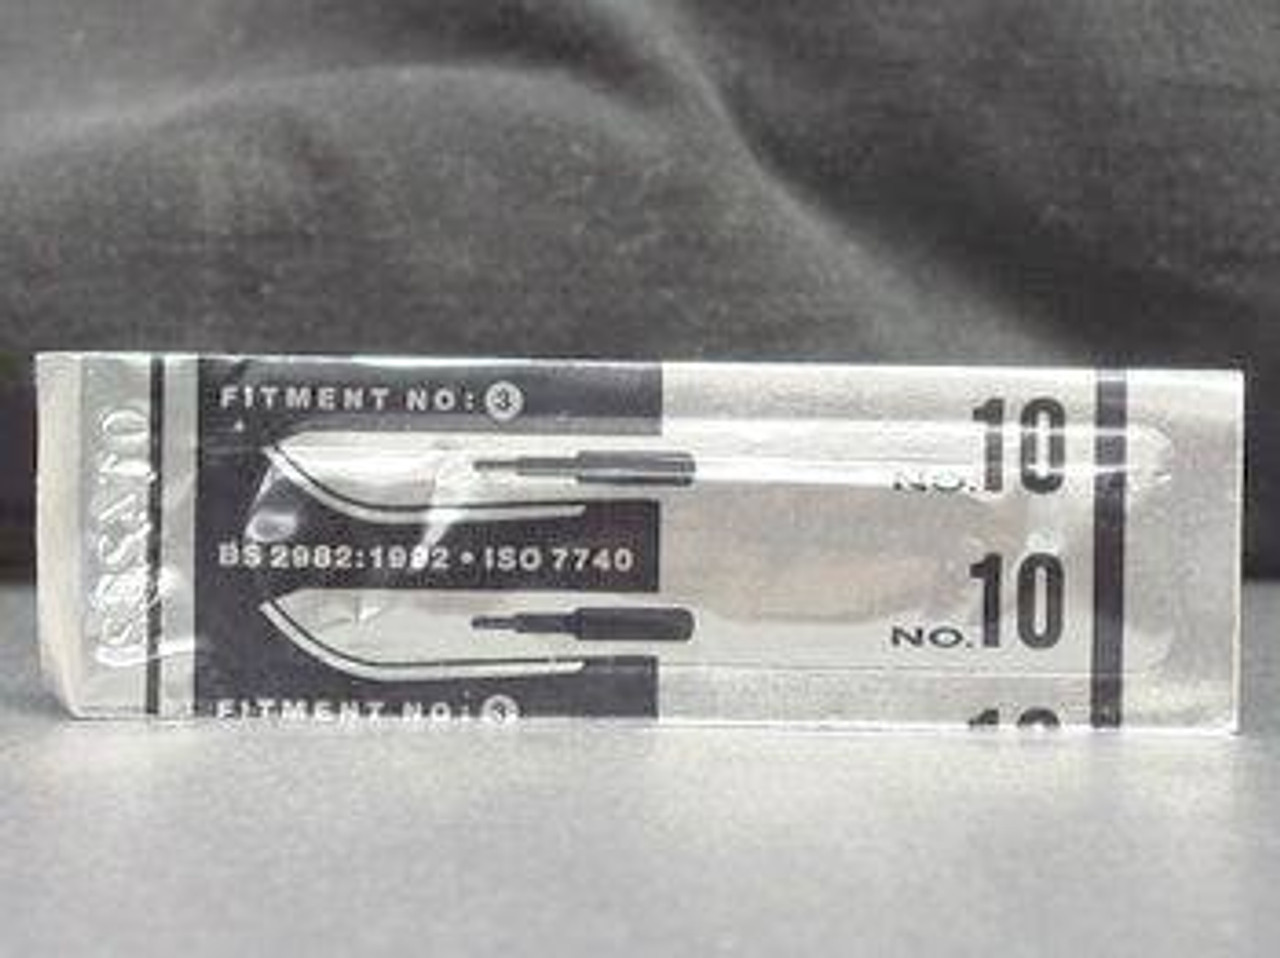 560-1010 Sterile Surgical Scalpel Blade Only #10 Stainless Steel (560-1010) 100/bx